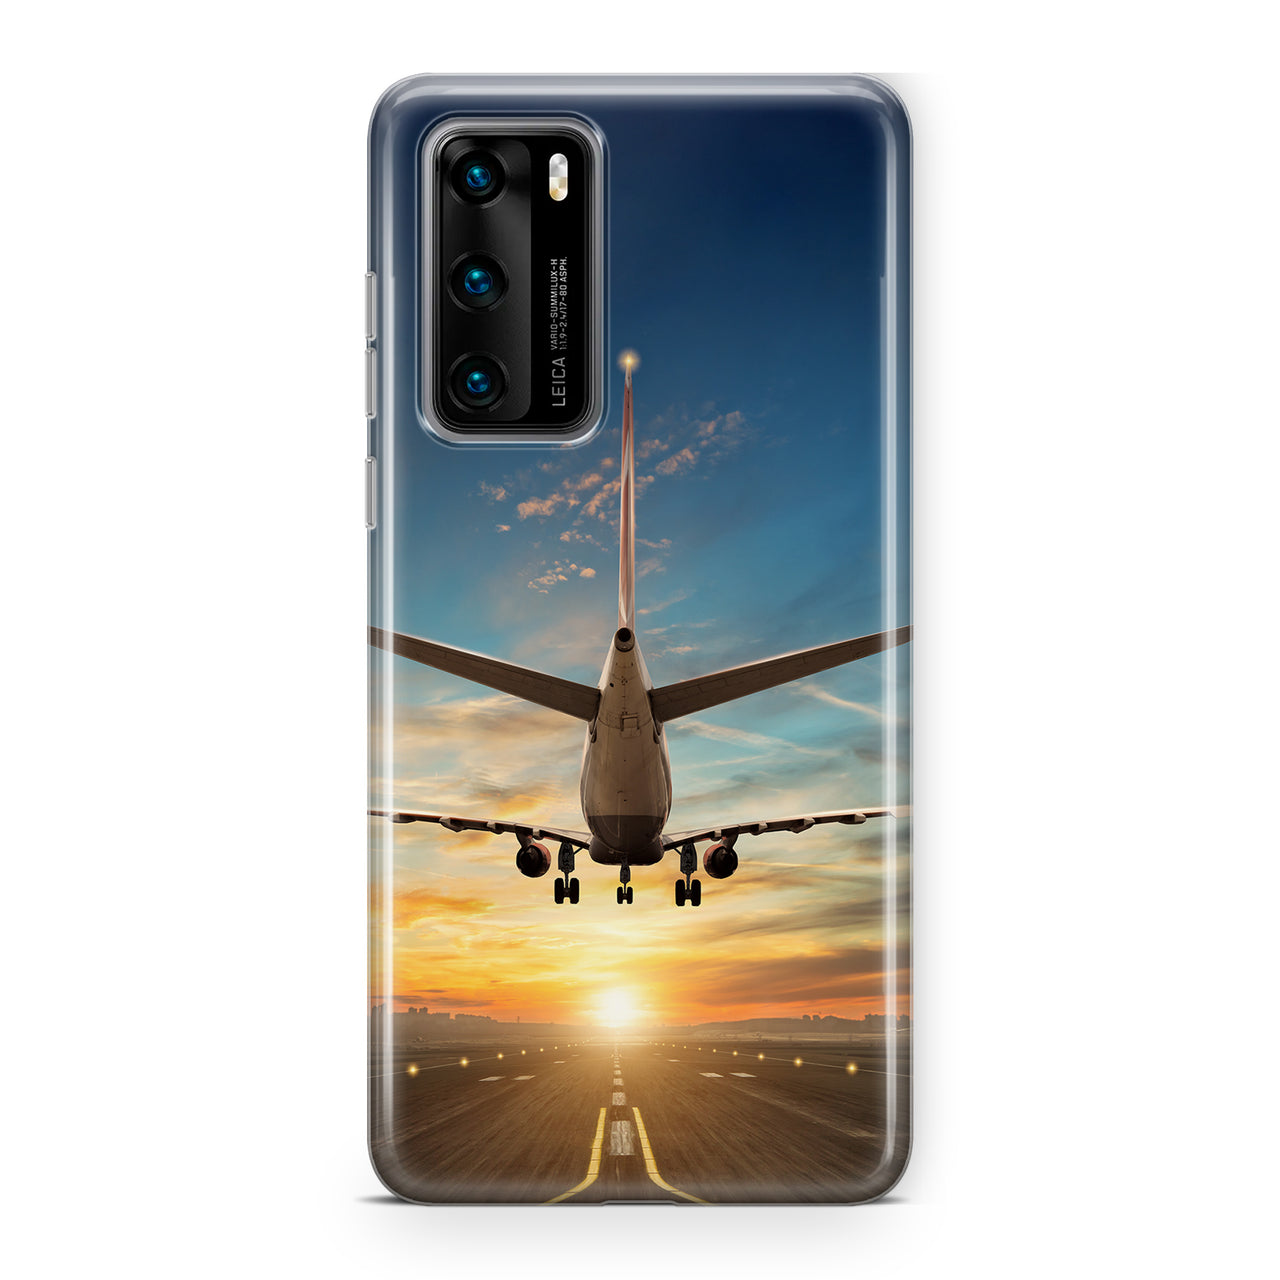 Airplane over Runway Towards the Sunrise Designed Huawei Cases